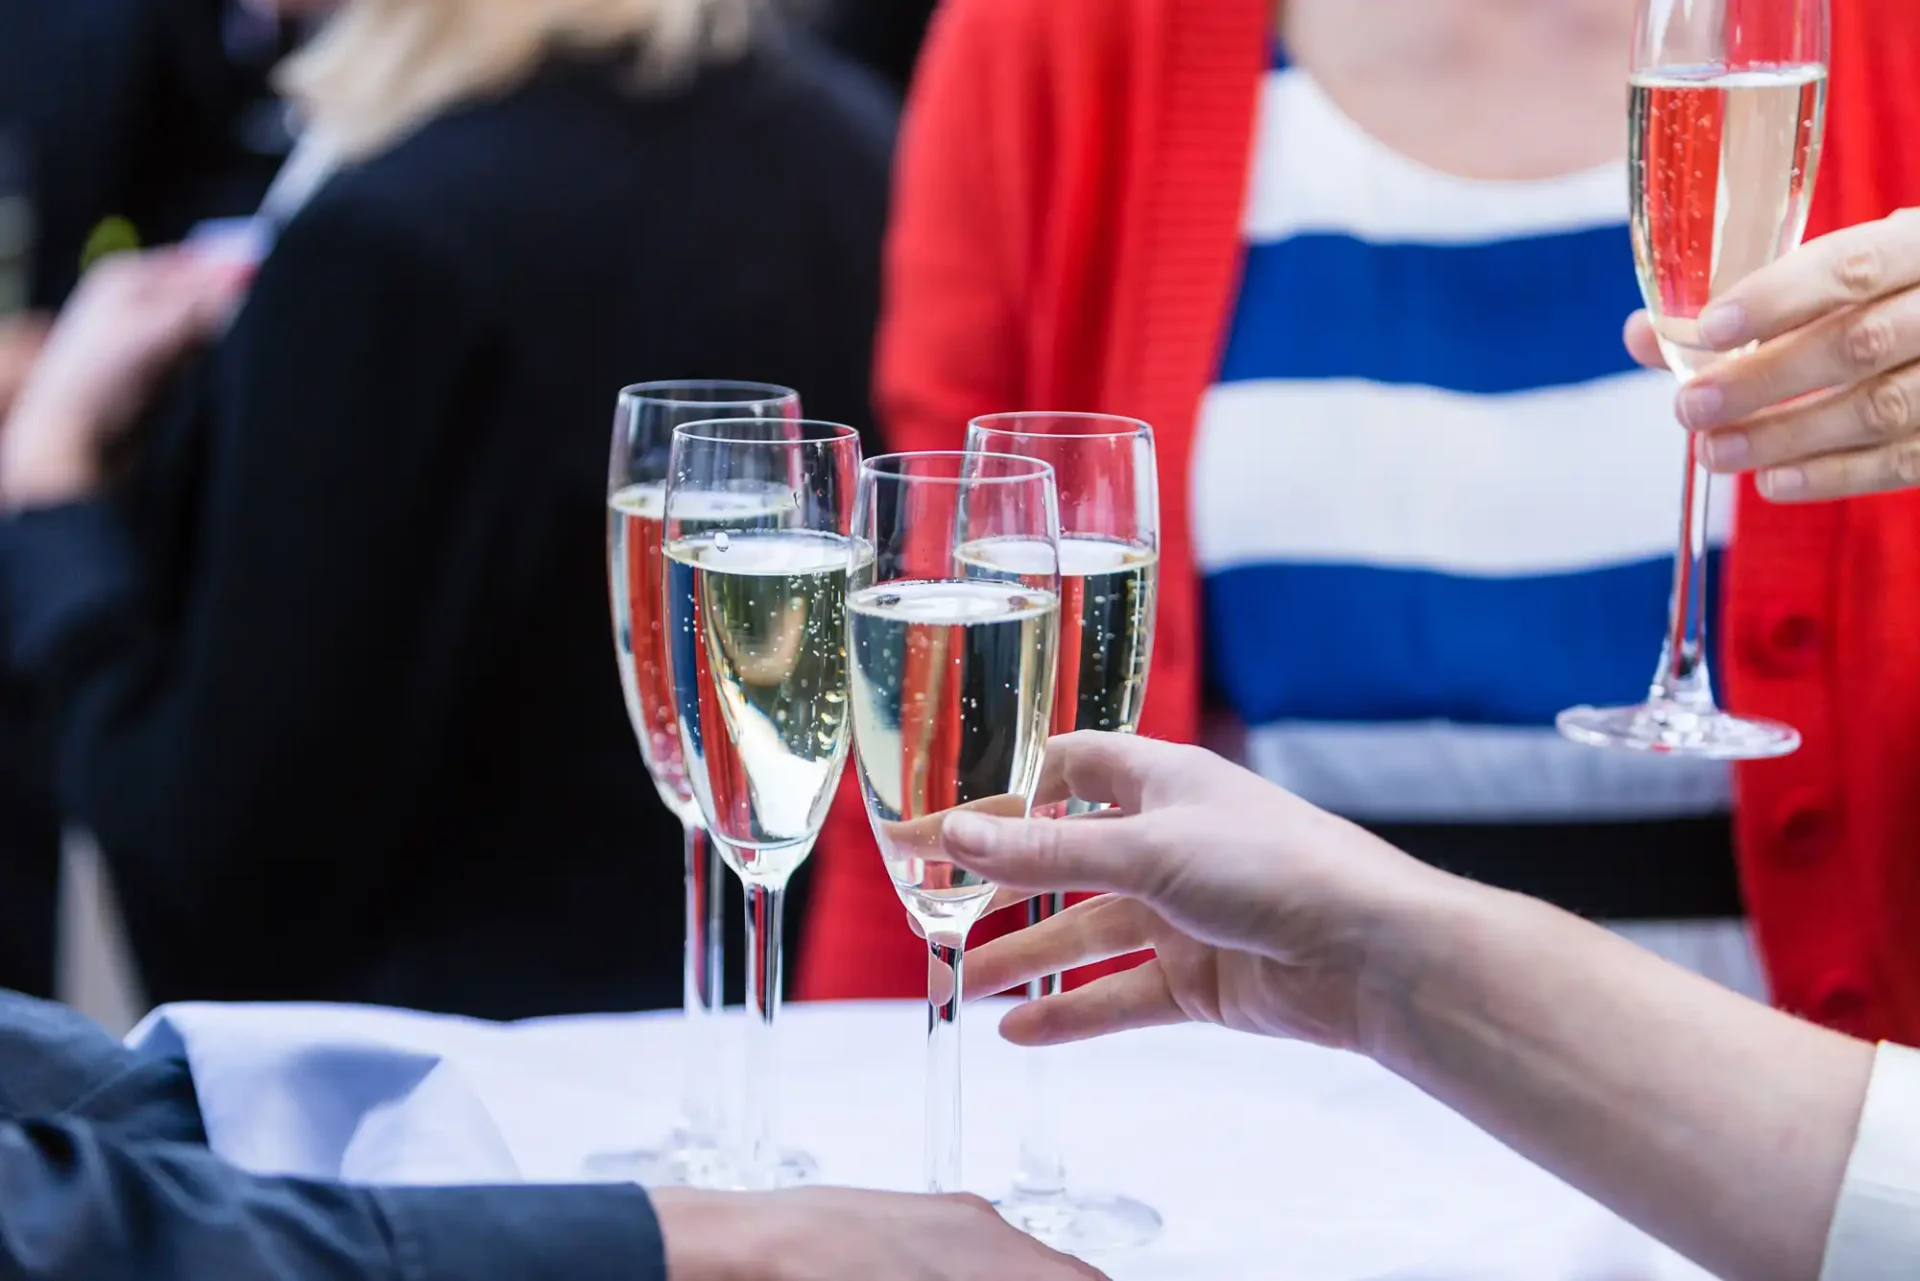 People toasting with champagne glasses at a social event, with a focus on the glasses clinking together.